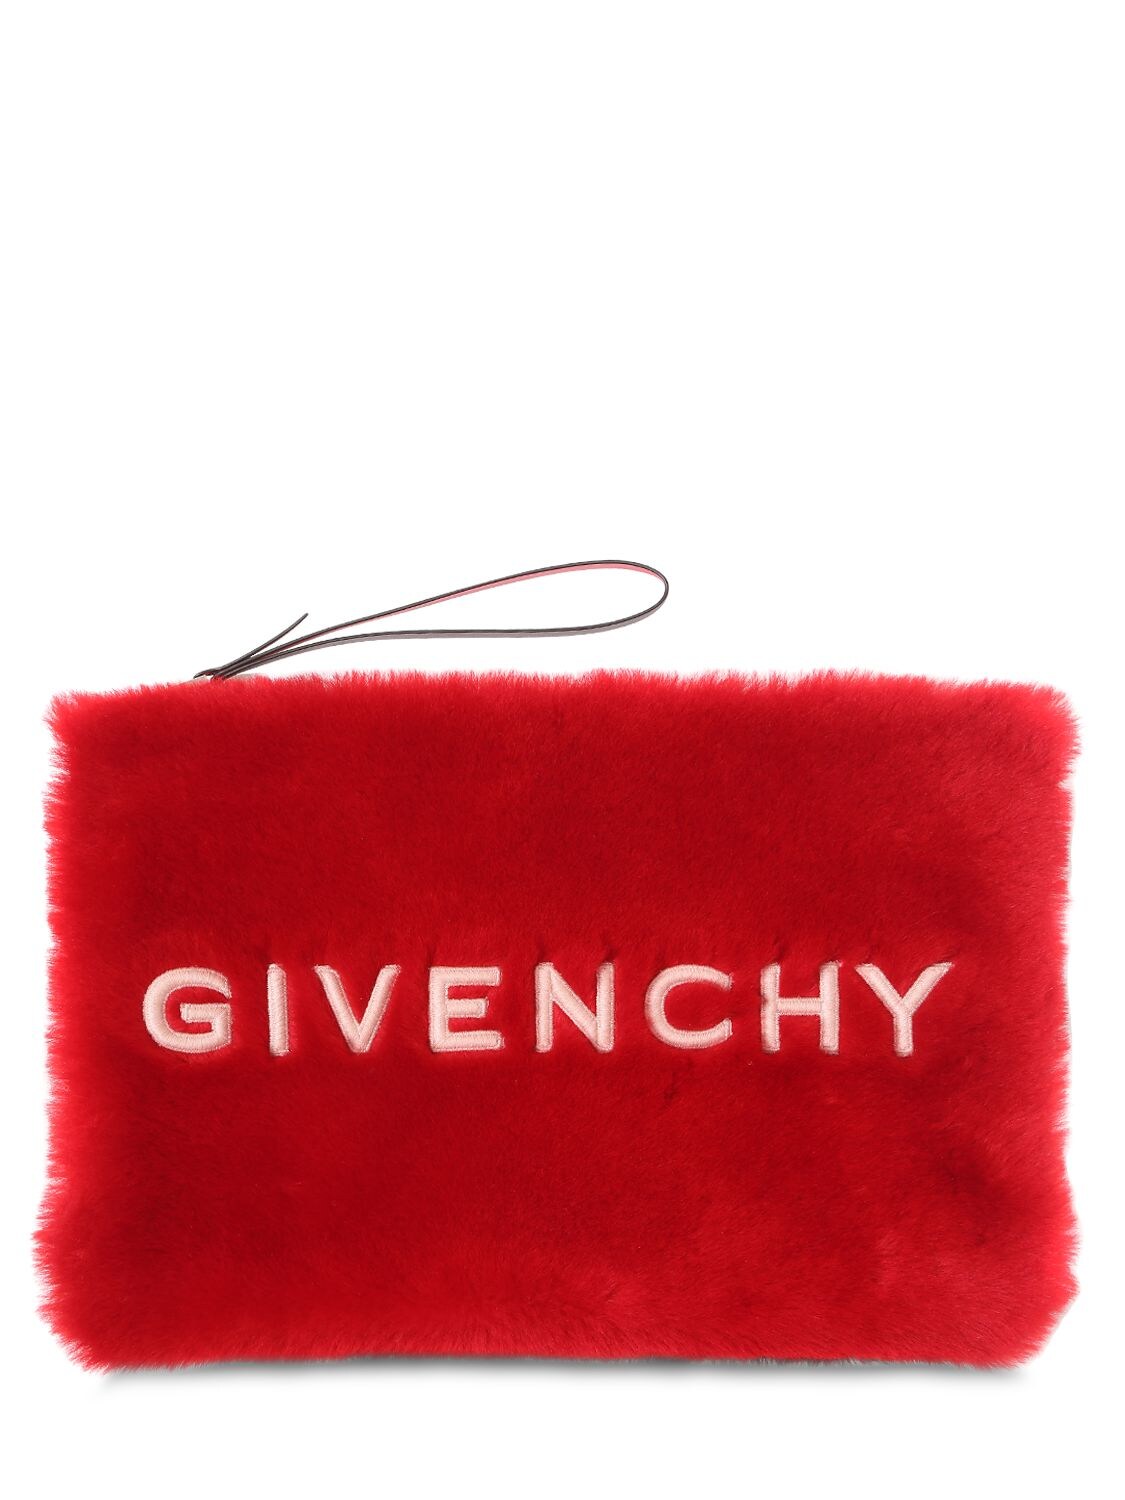 Givenchy Gv3 Logo Eco Fur Pouch In Red/bordeaux